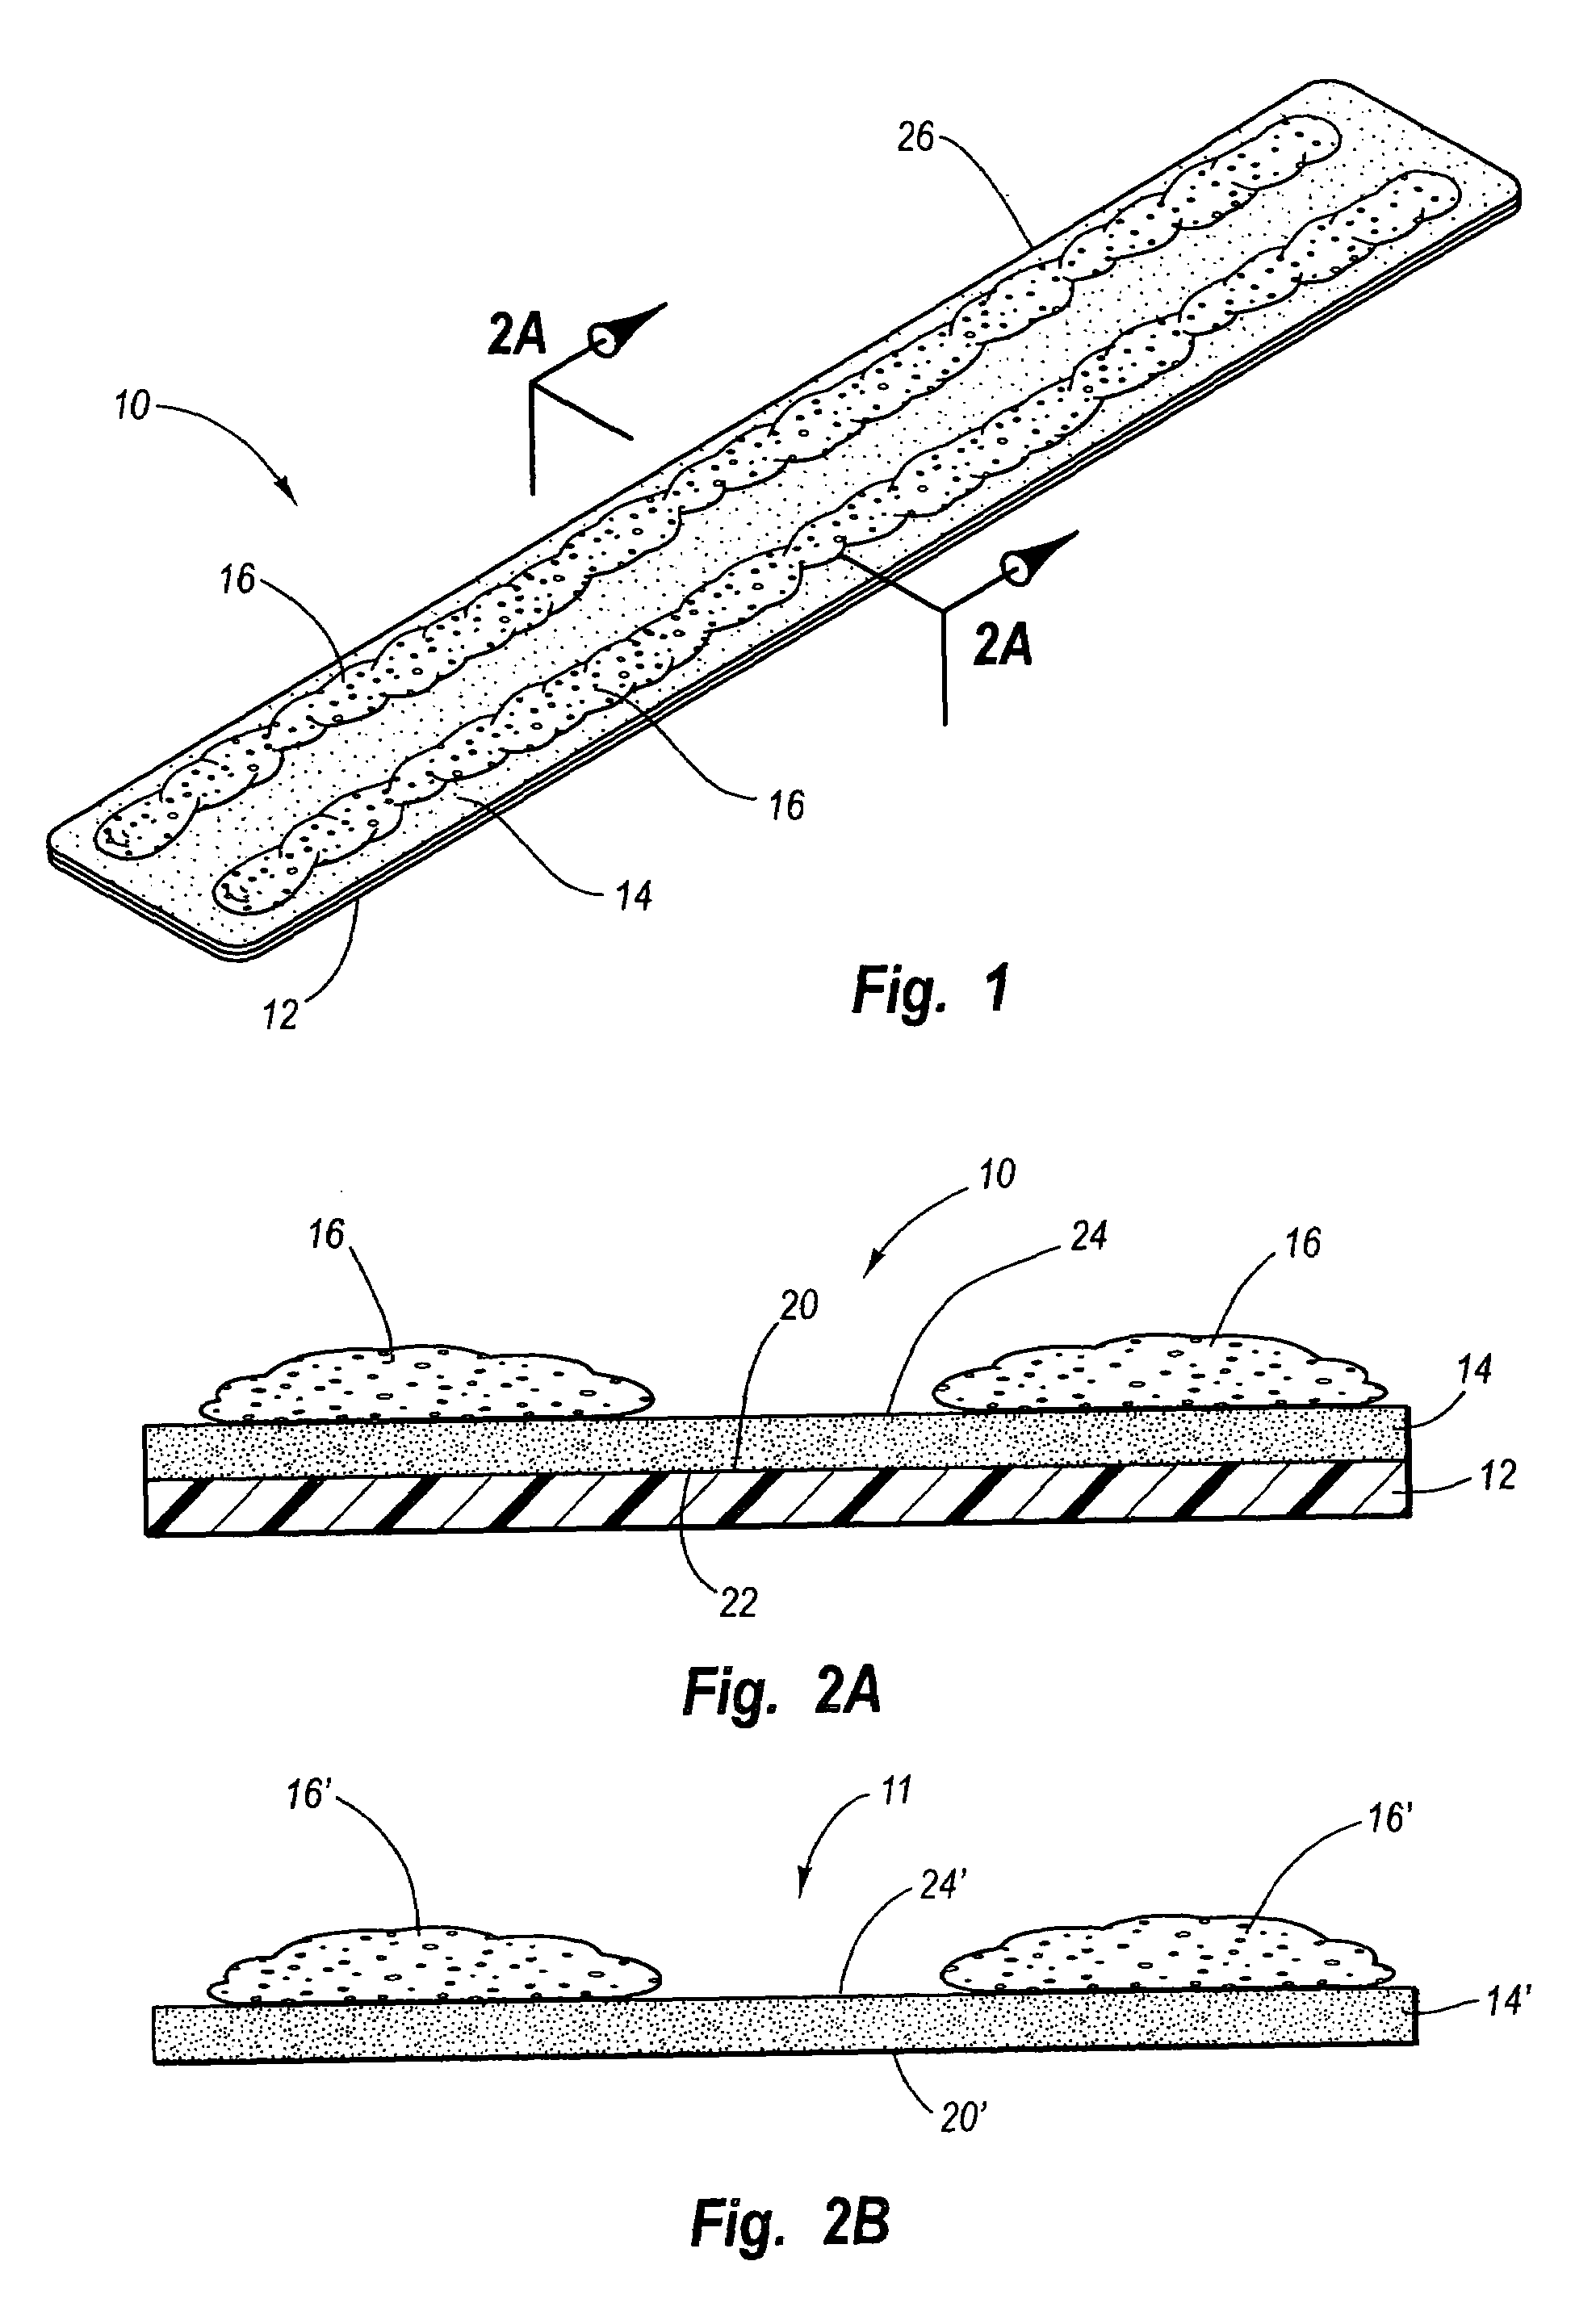 Treatment compositions and strips having a solid adhesive layer and treatment gel adjacent thereto